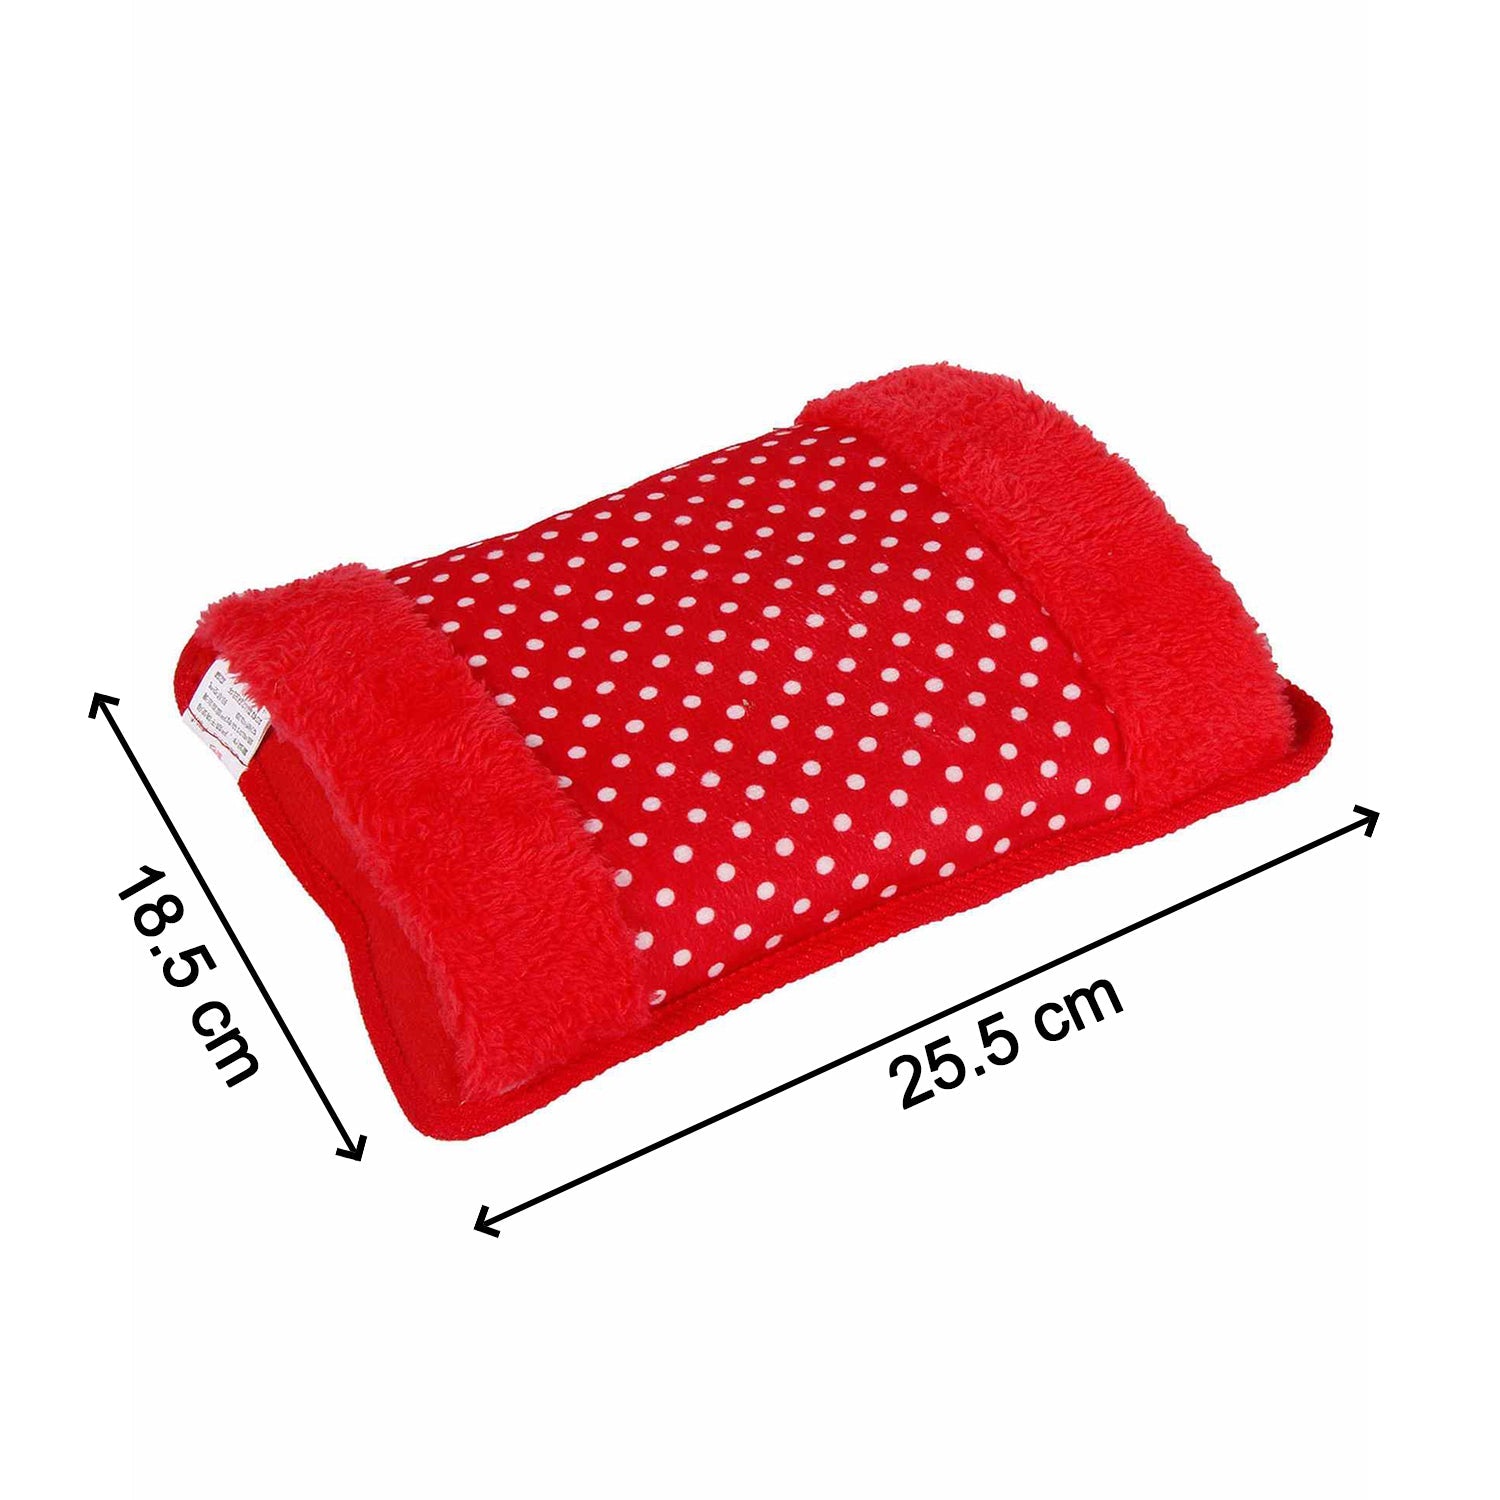 0381B Heating Bag and Heating Pad Used to Ease Pain in Joints, Muscles and Soft Tissues Etc.